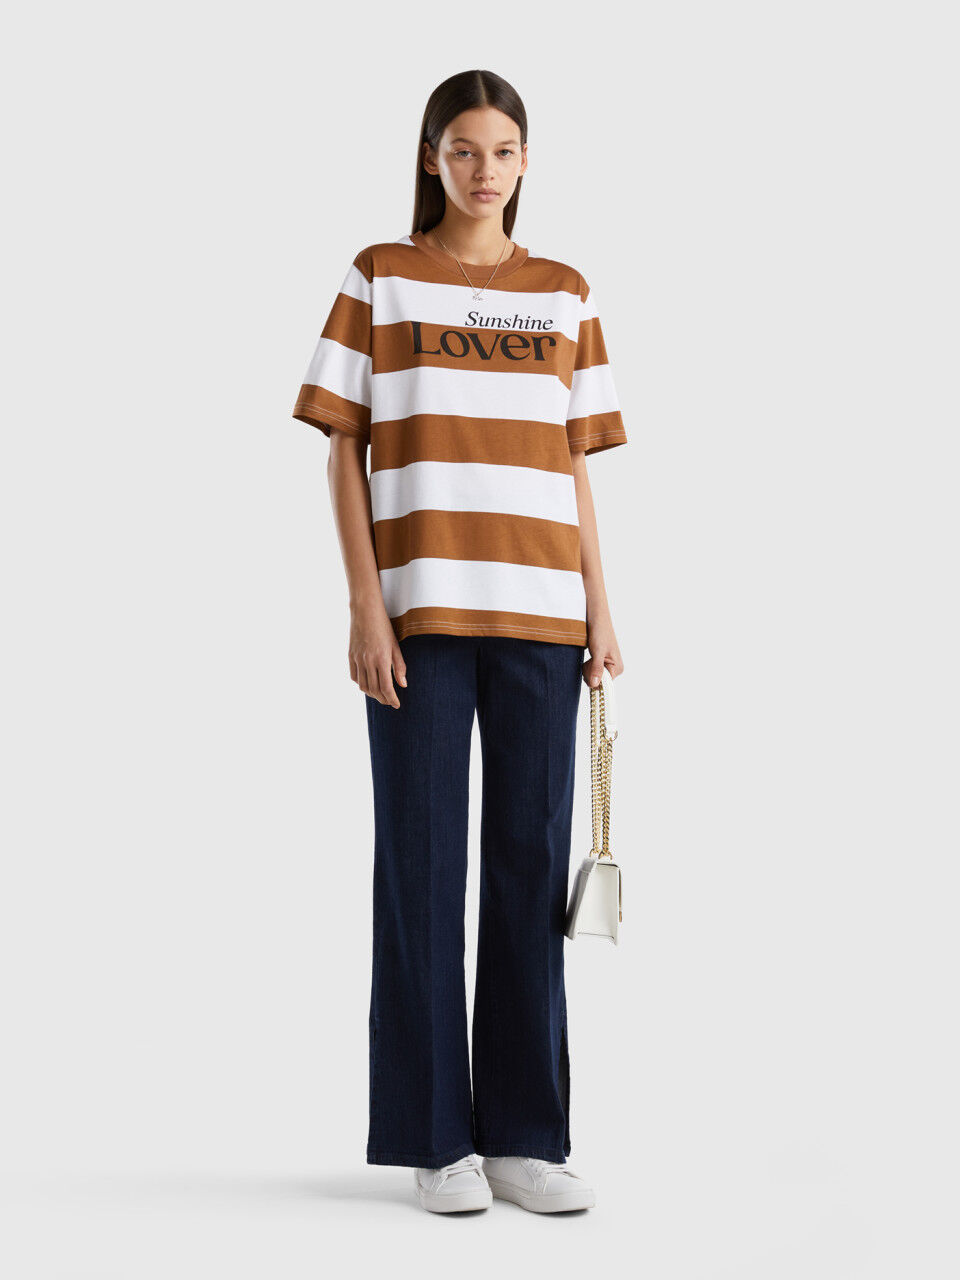 Striped t-shirt with slogan